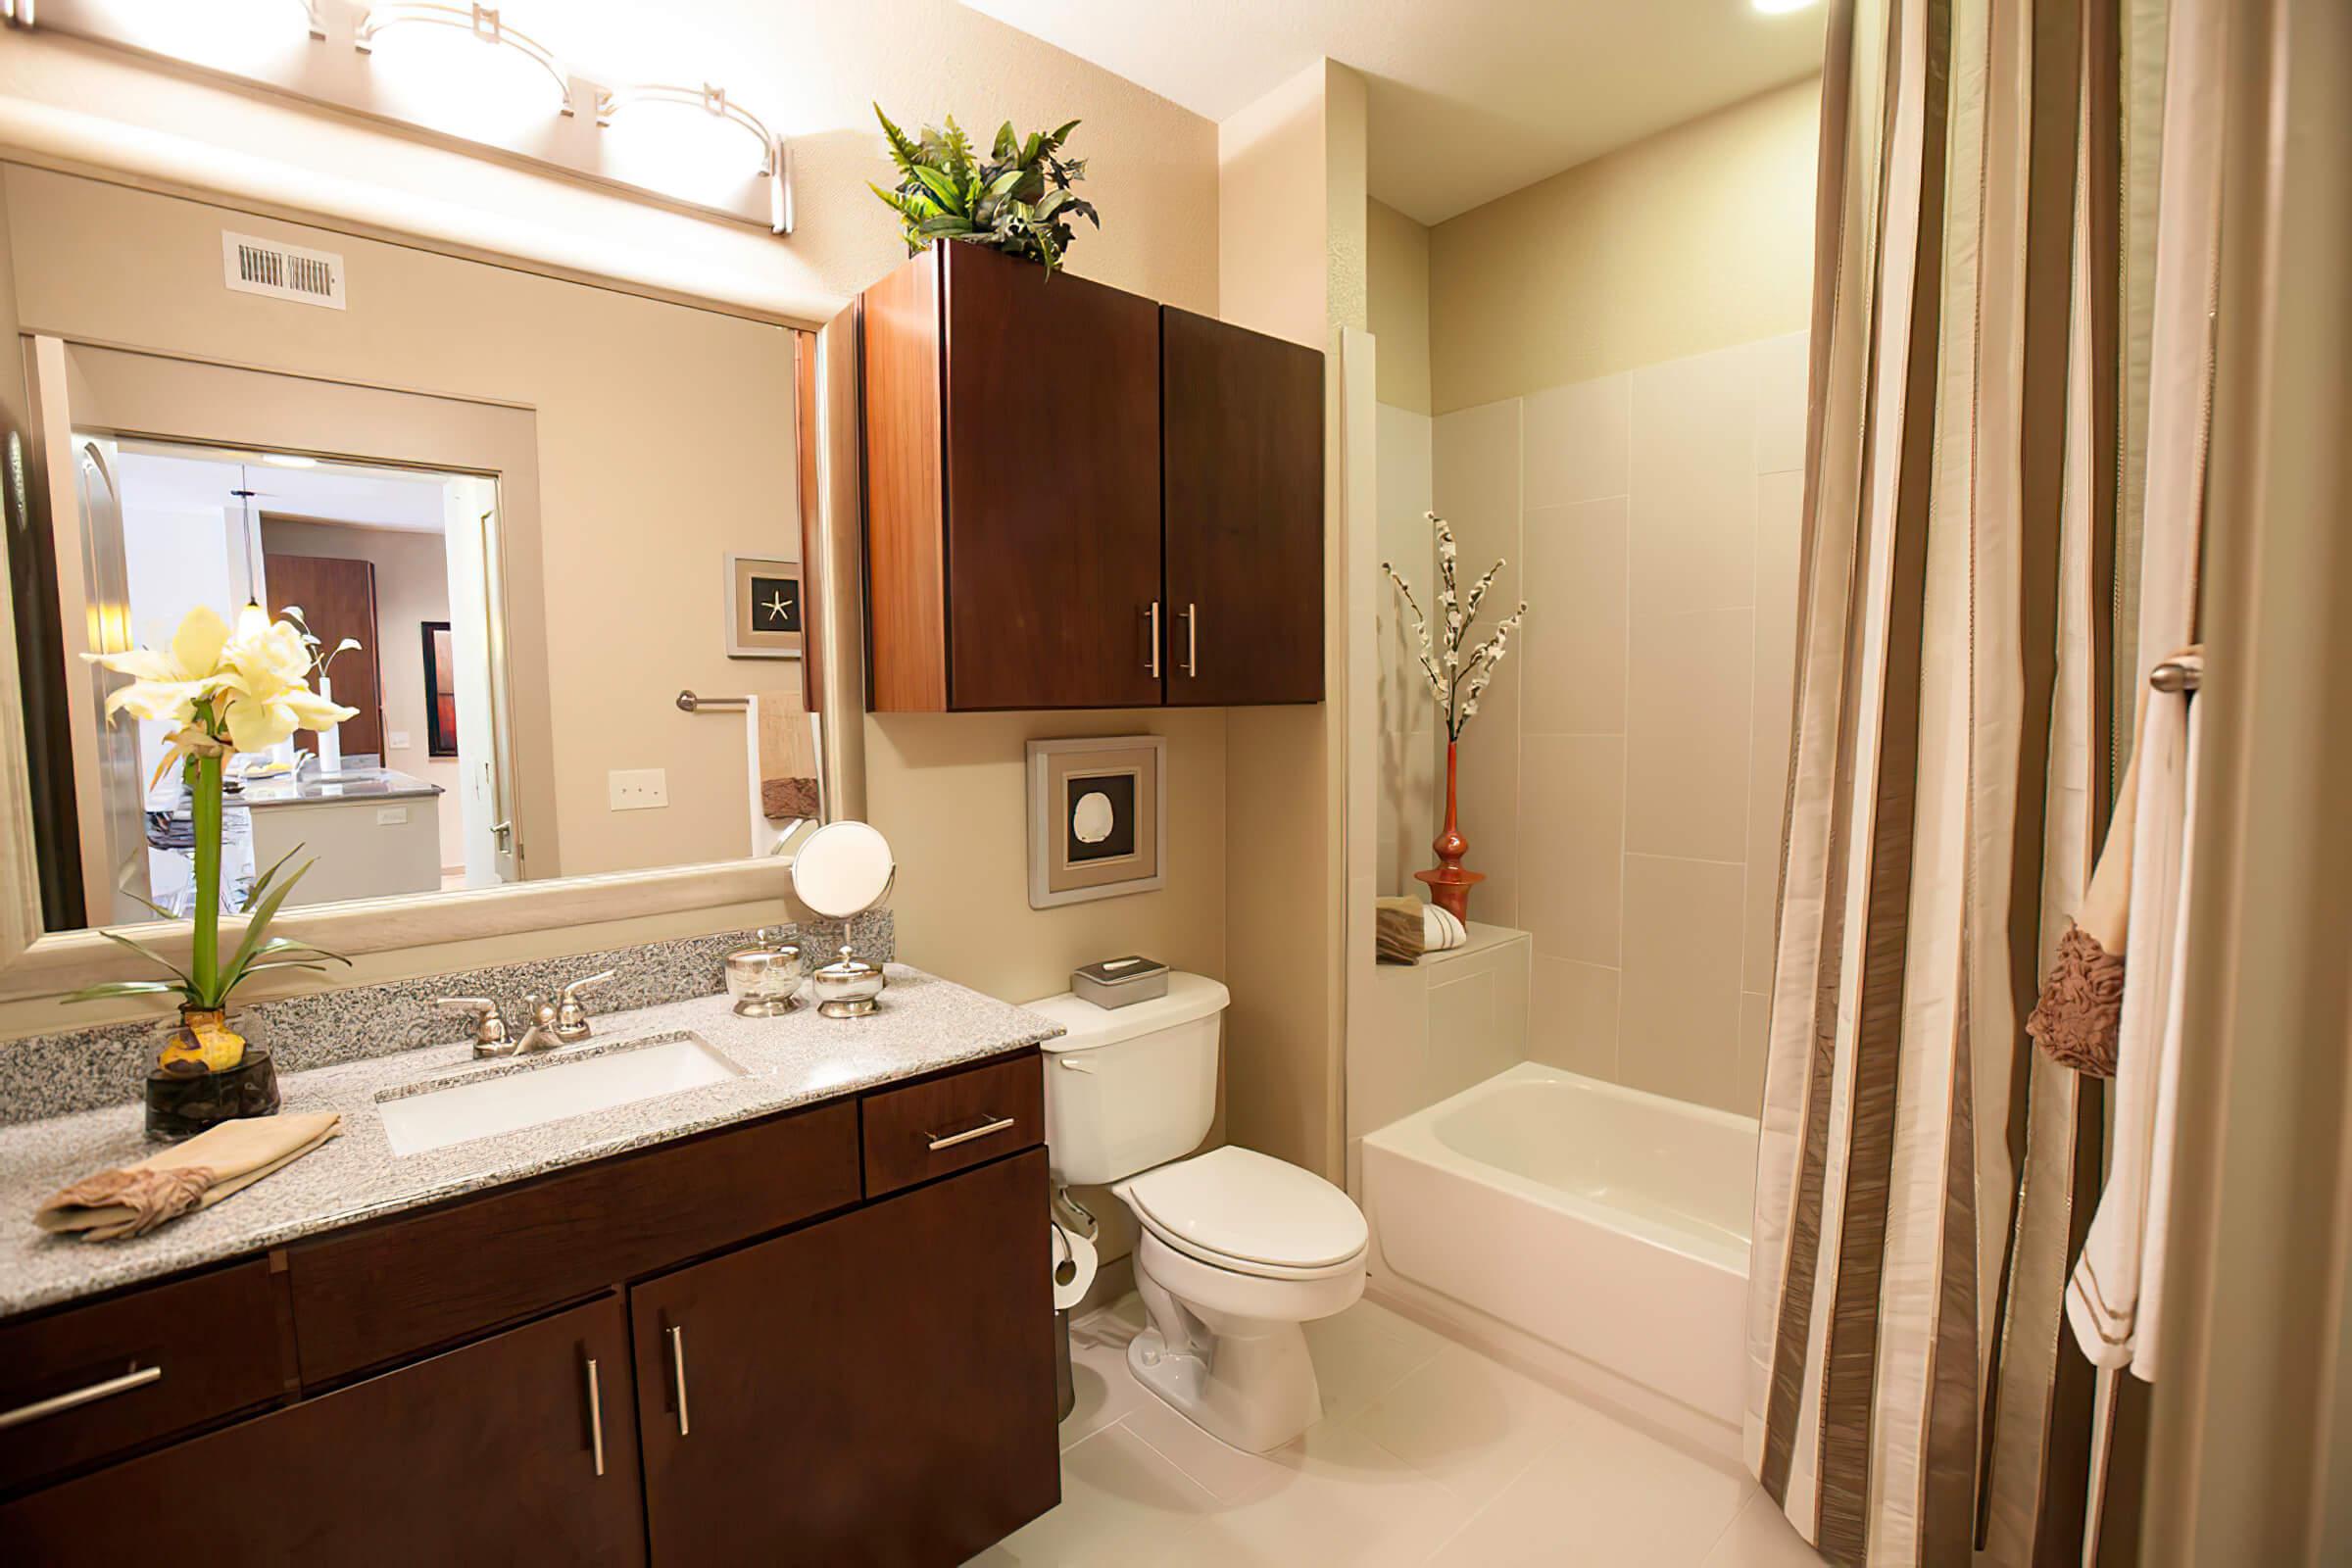 OPULENT BATHROOMS WITH CUSTOM FRAMED MIRRORS